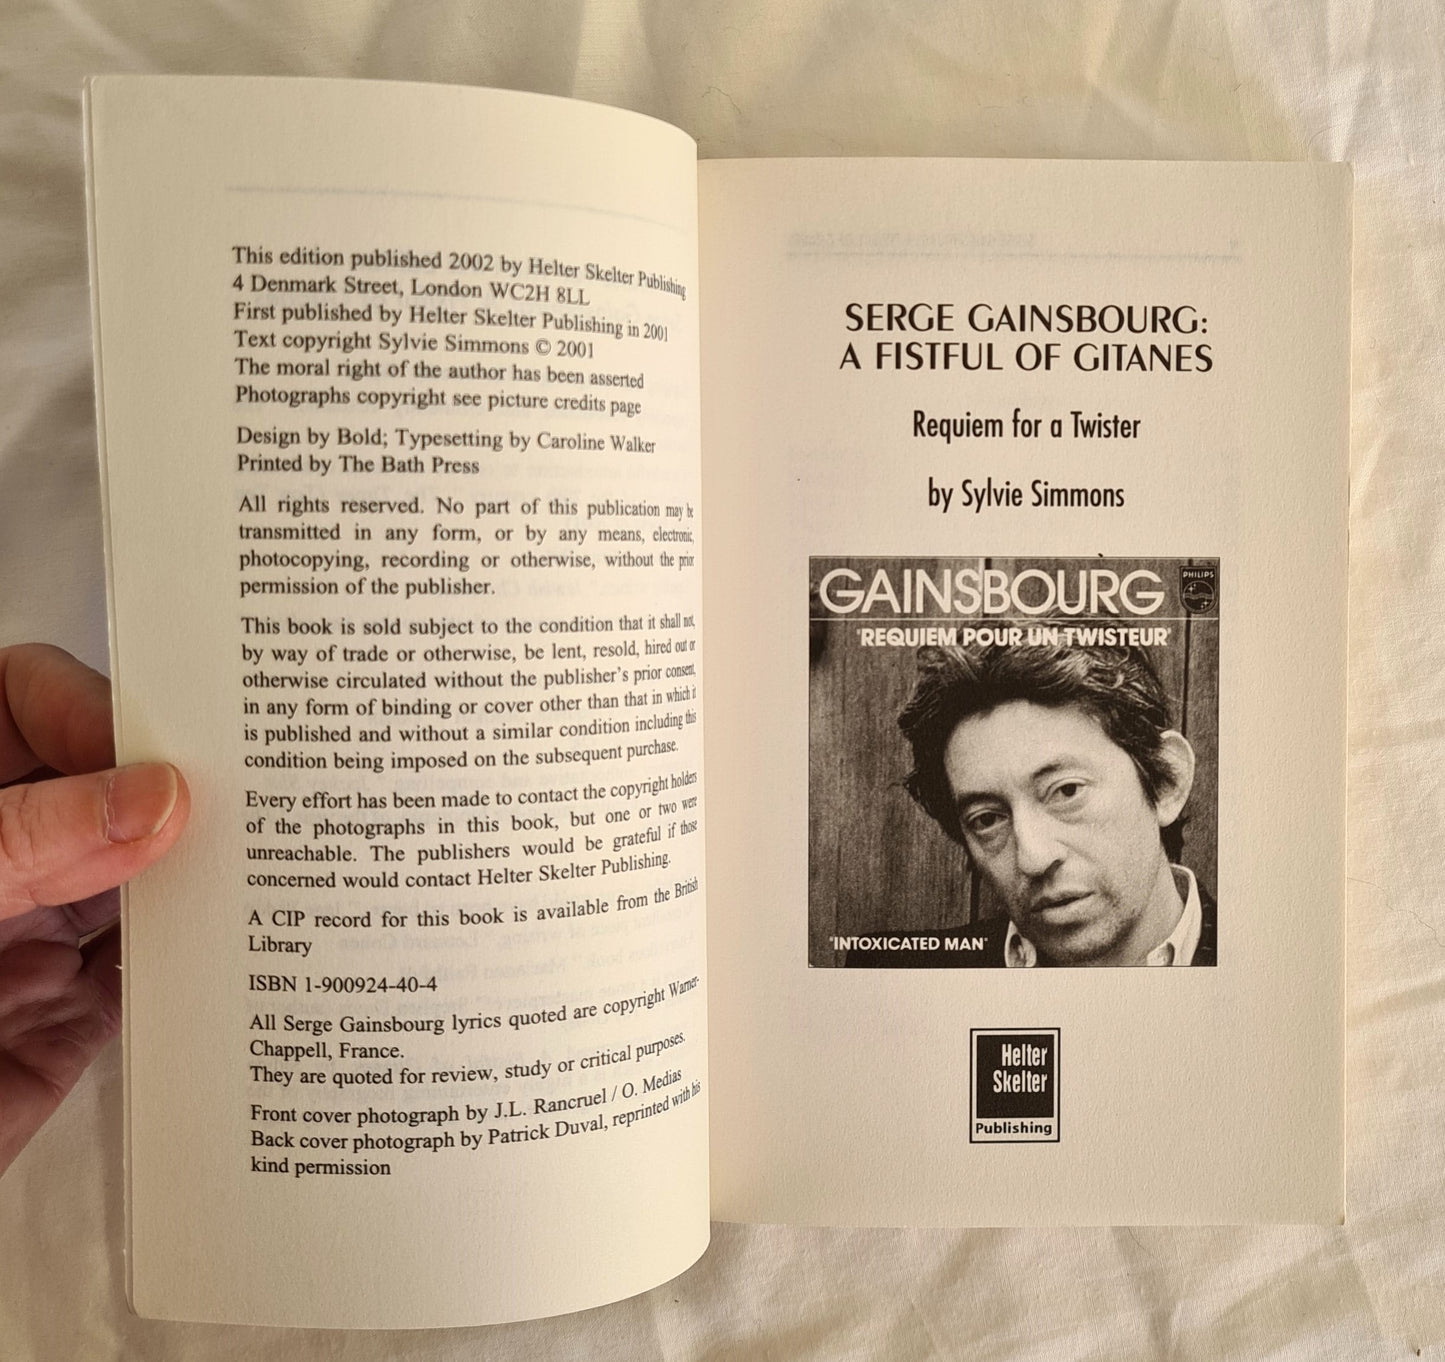 Serge Gainsbourg: A Fistful of Gitanes by Sylvie Simmons